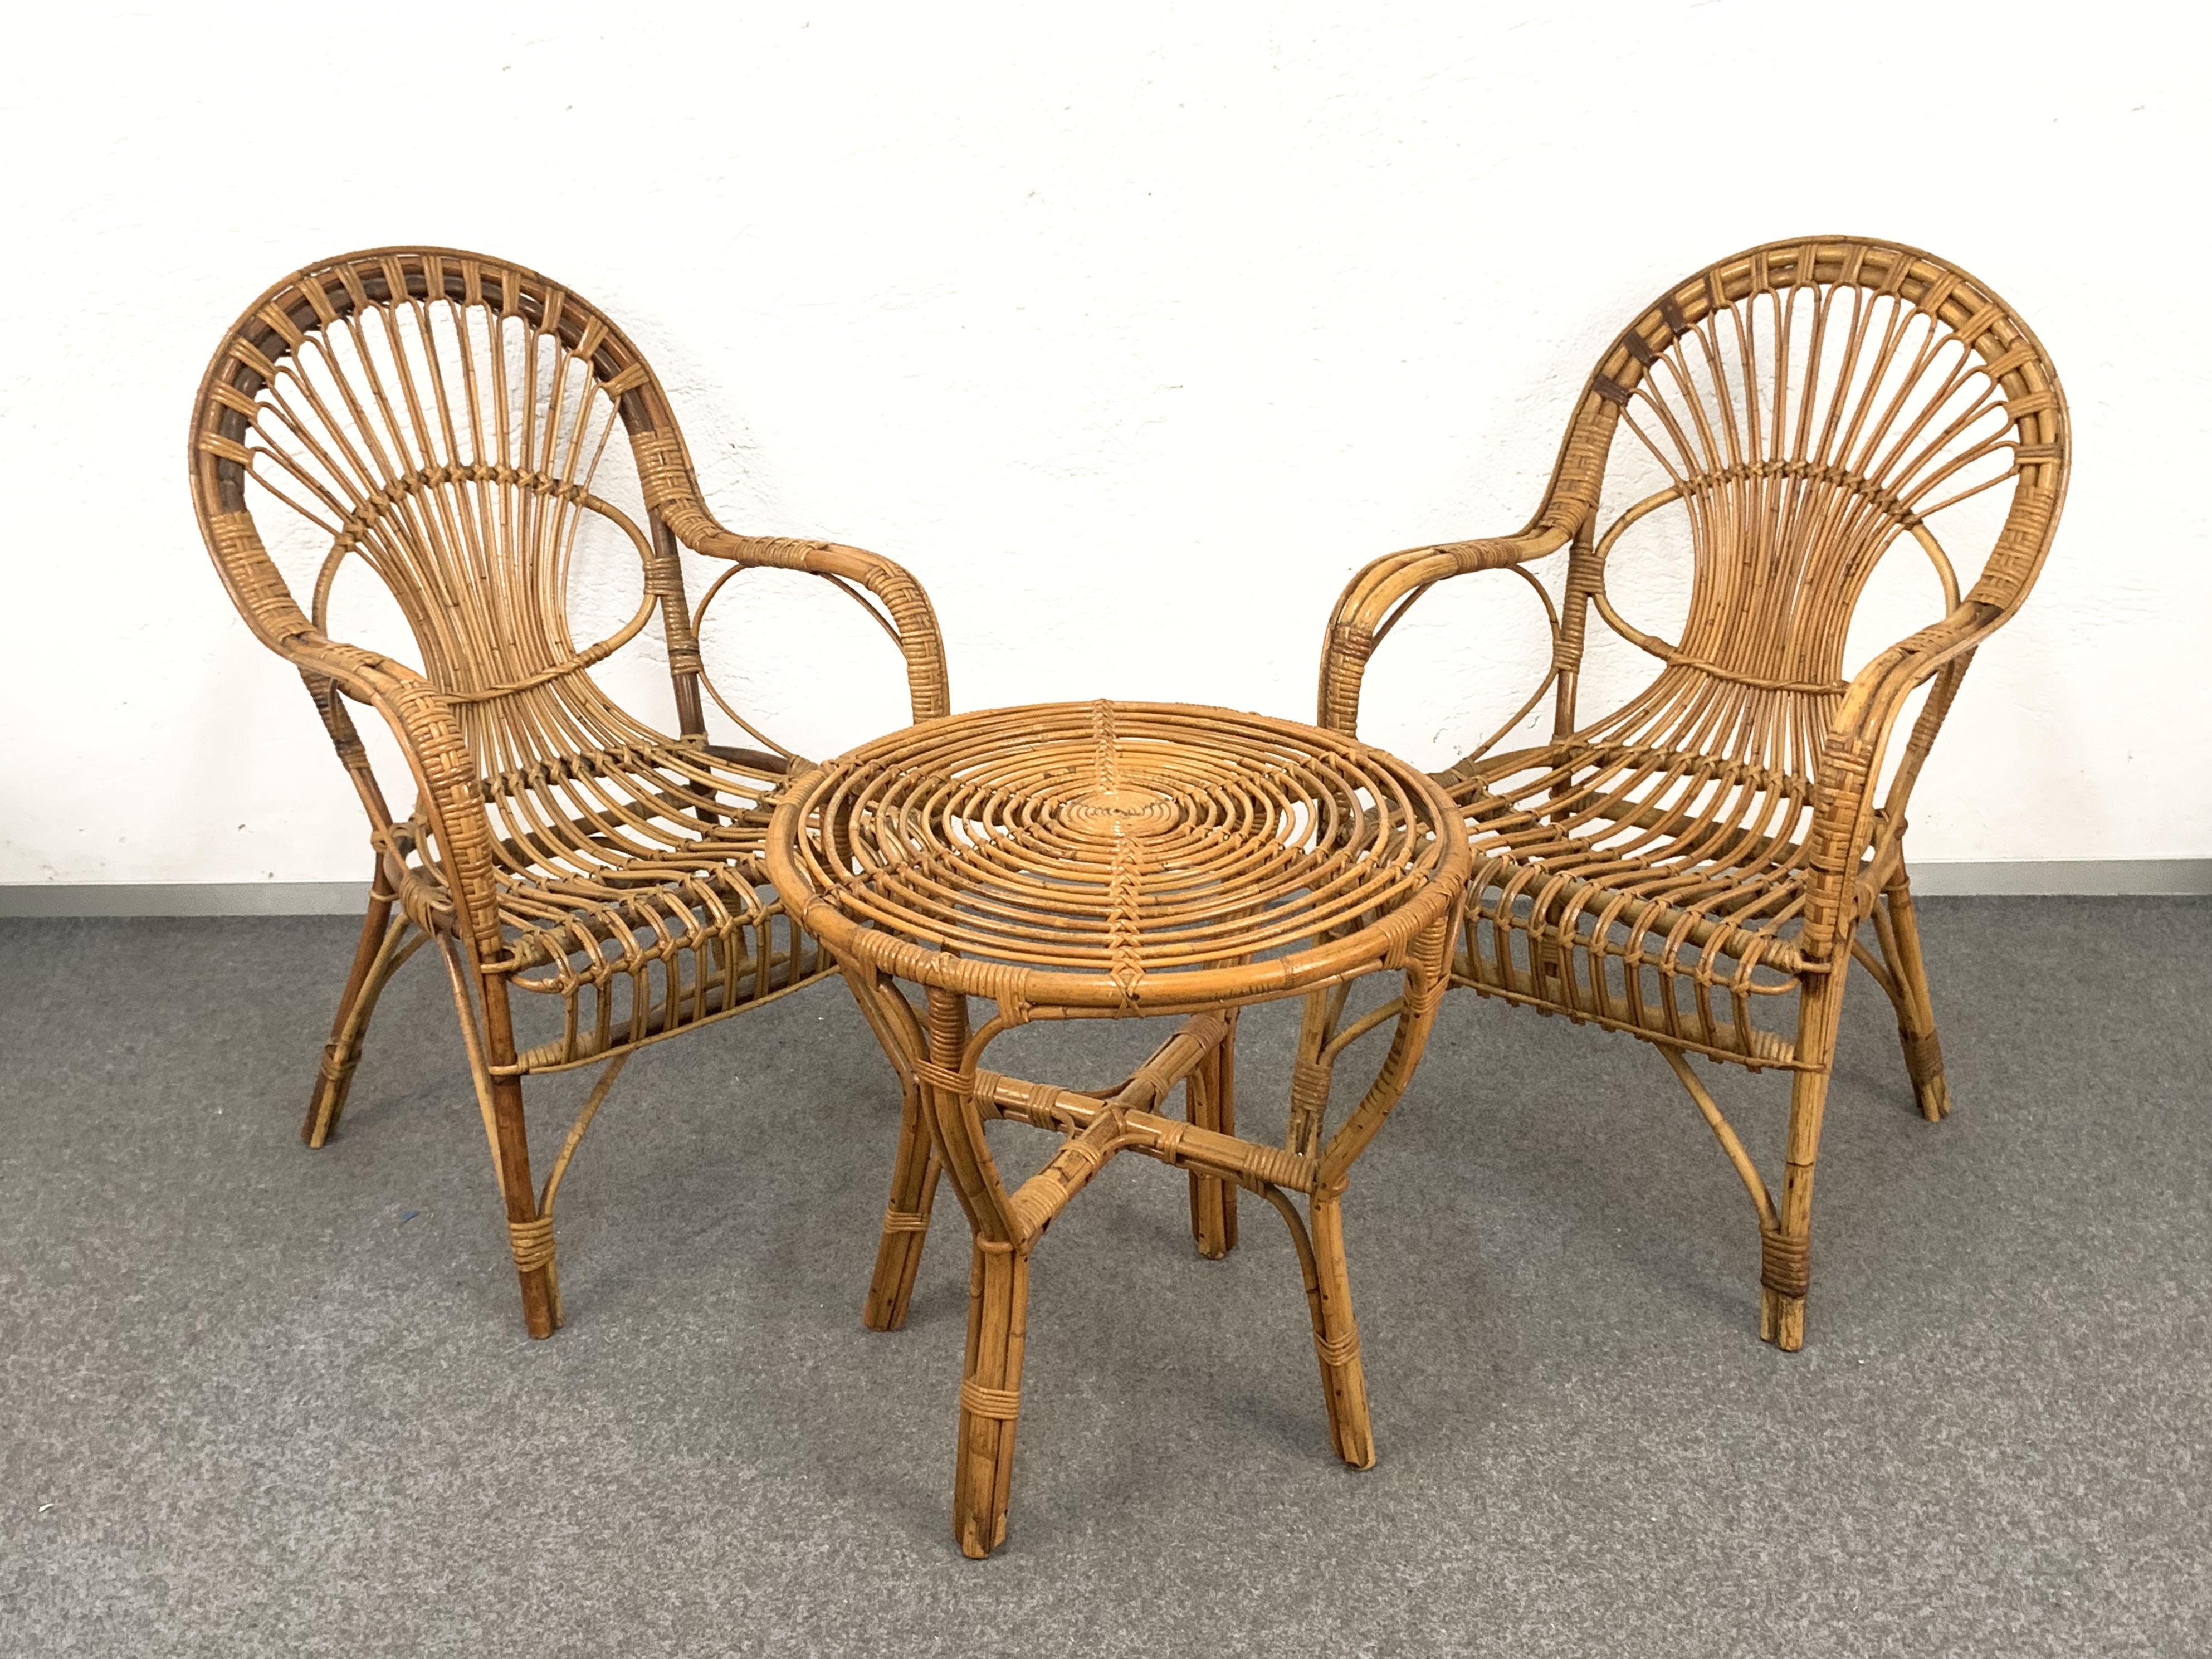 Midcentury Rattan and Bamboo Sofa, Armchairs and Italian Coffee Table, 1960s For Sale 4